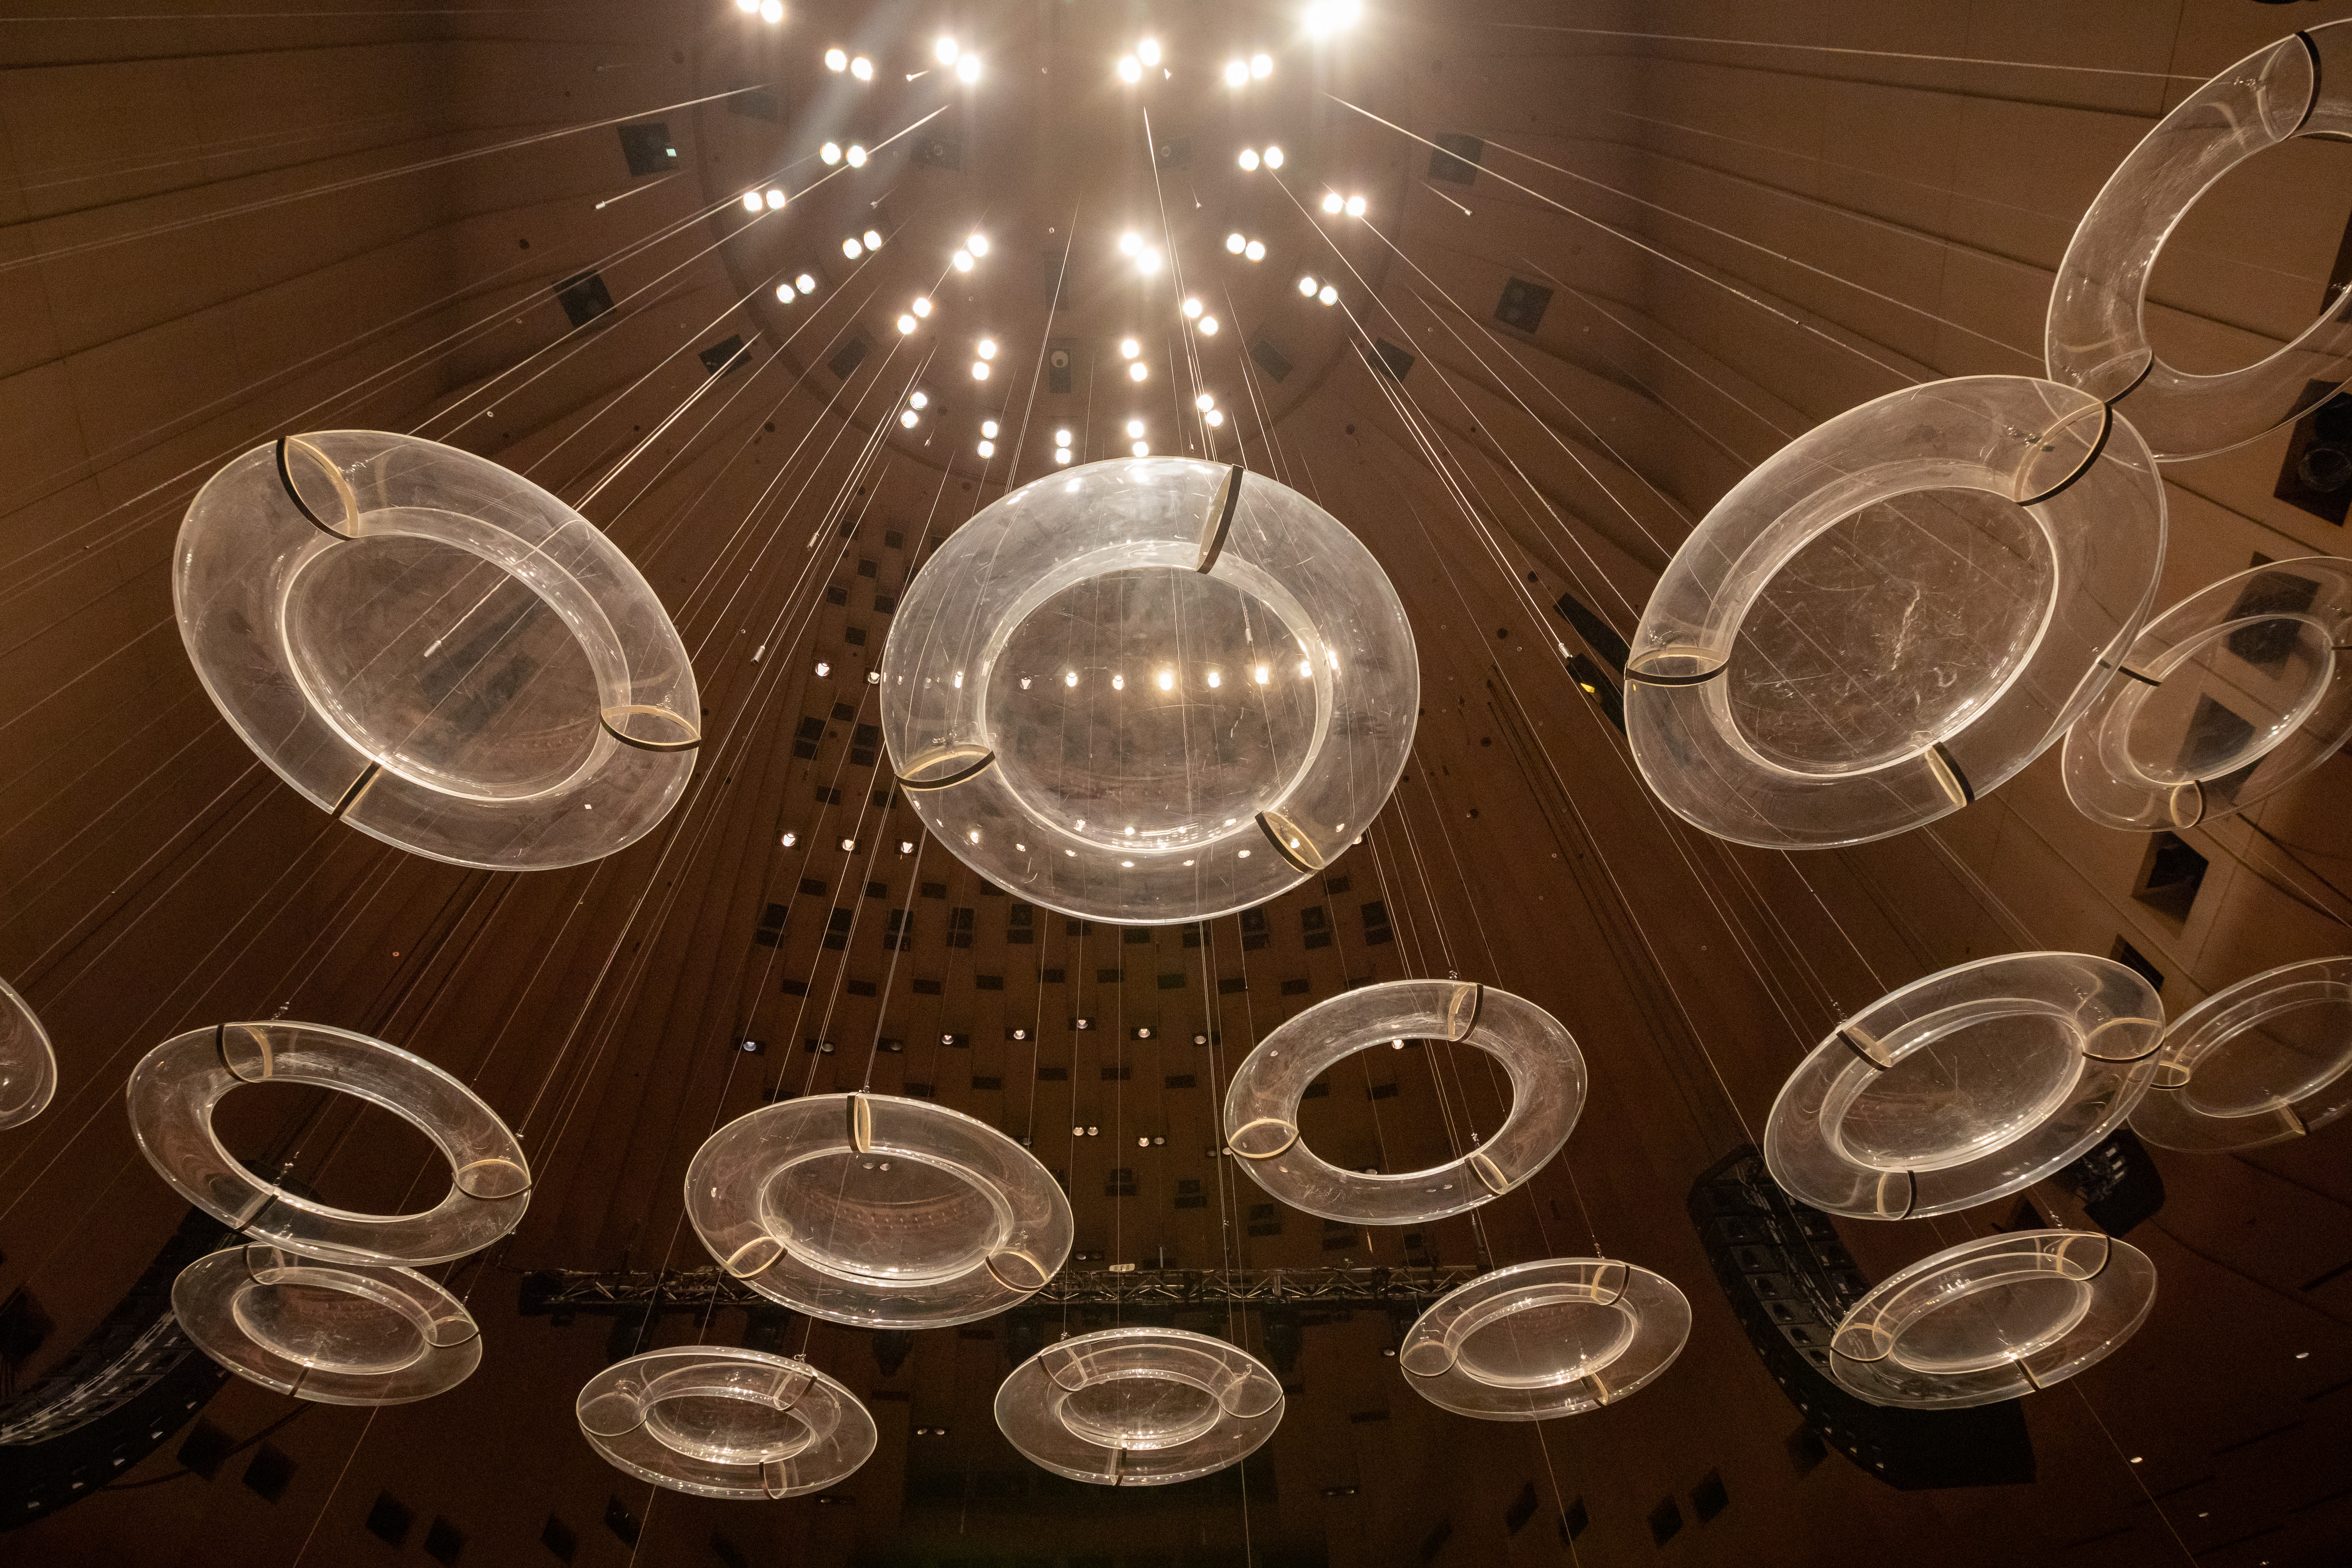 Looking up at a number of perspex discs hanging from the ceiling of the Concert Hall.